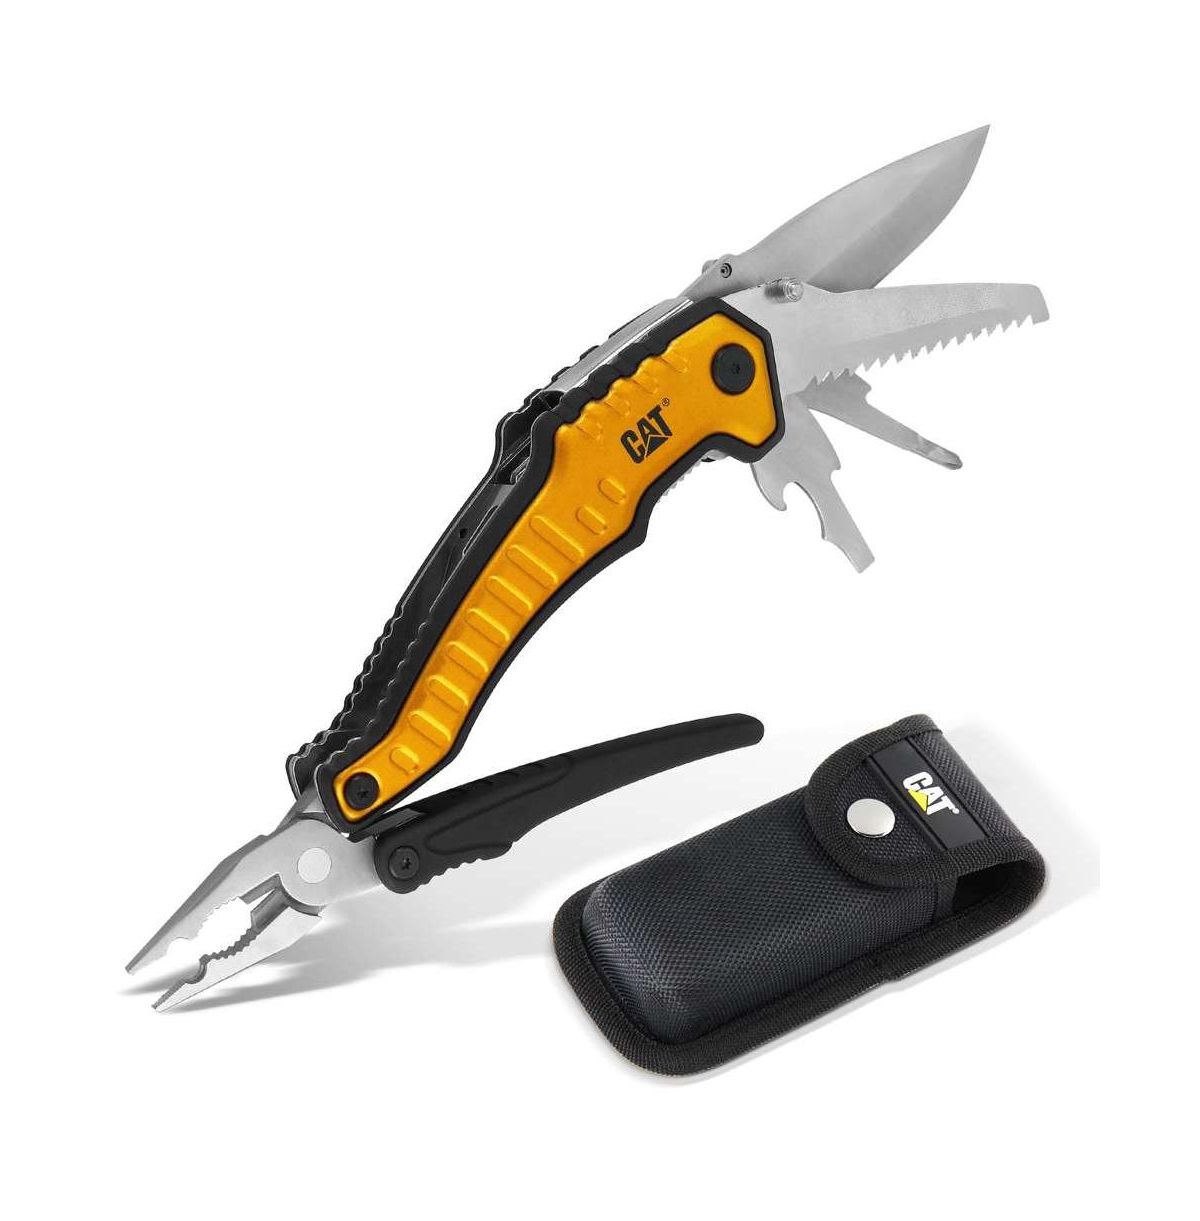 Xl 9-in-1 Multifunction Knife and Pliers Tool with Pouch